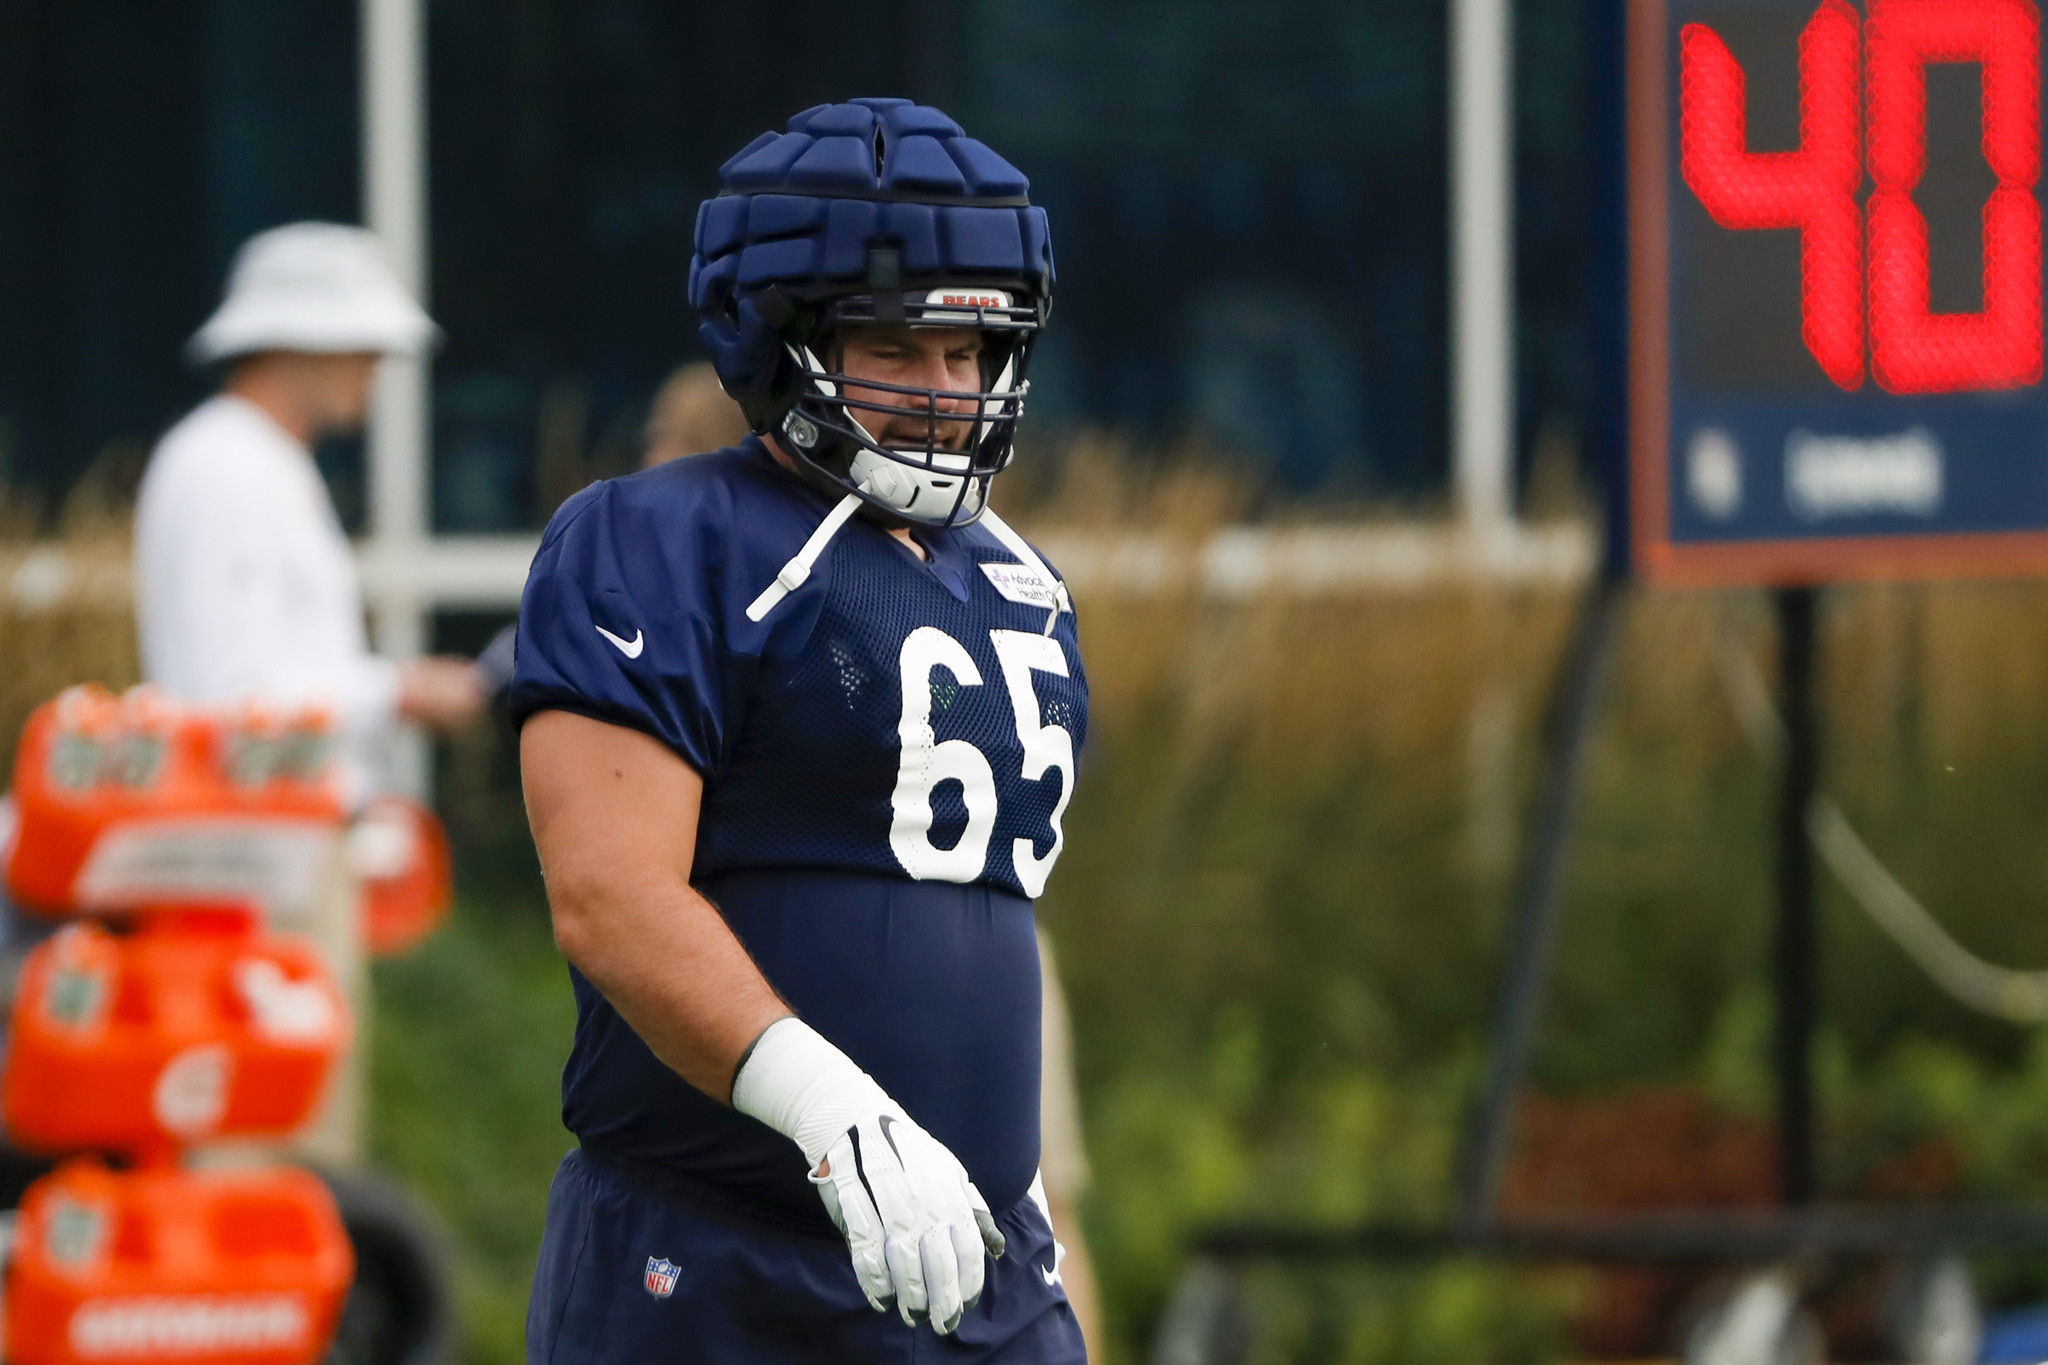 Chicago Bears: Why players are wearing padded helmets